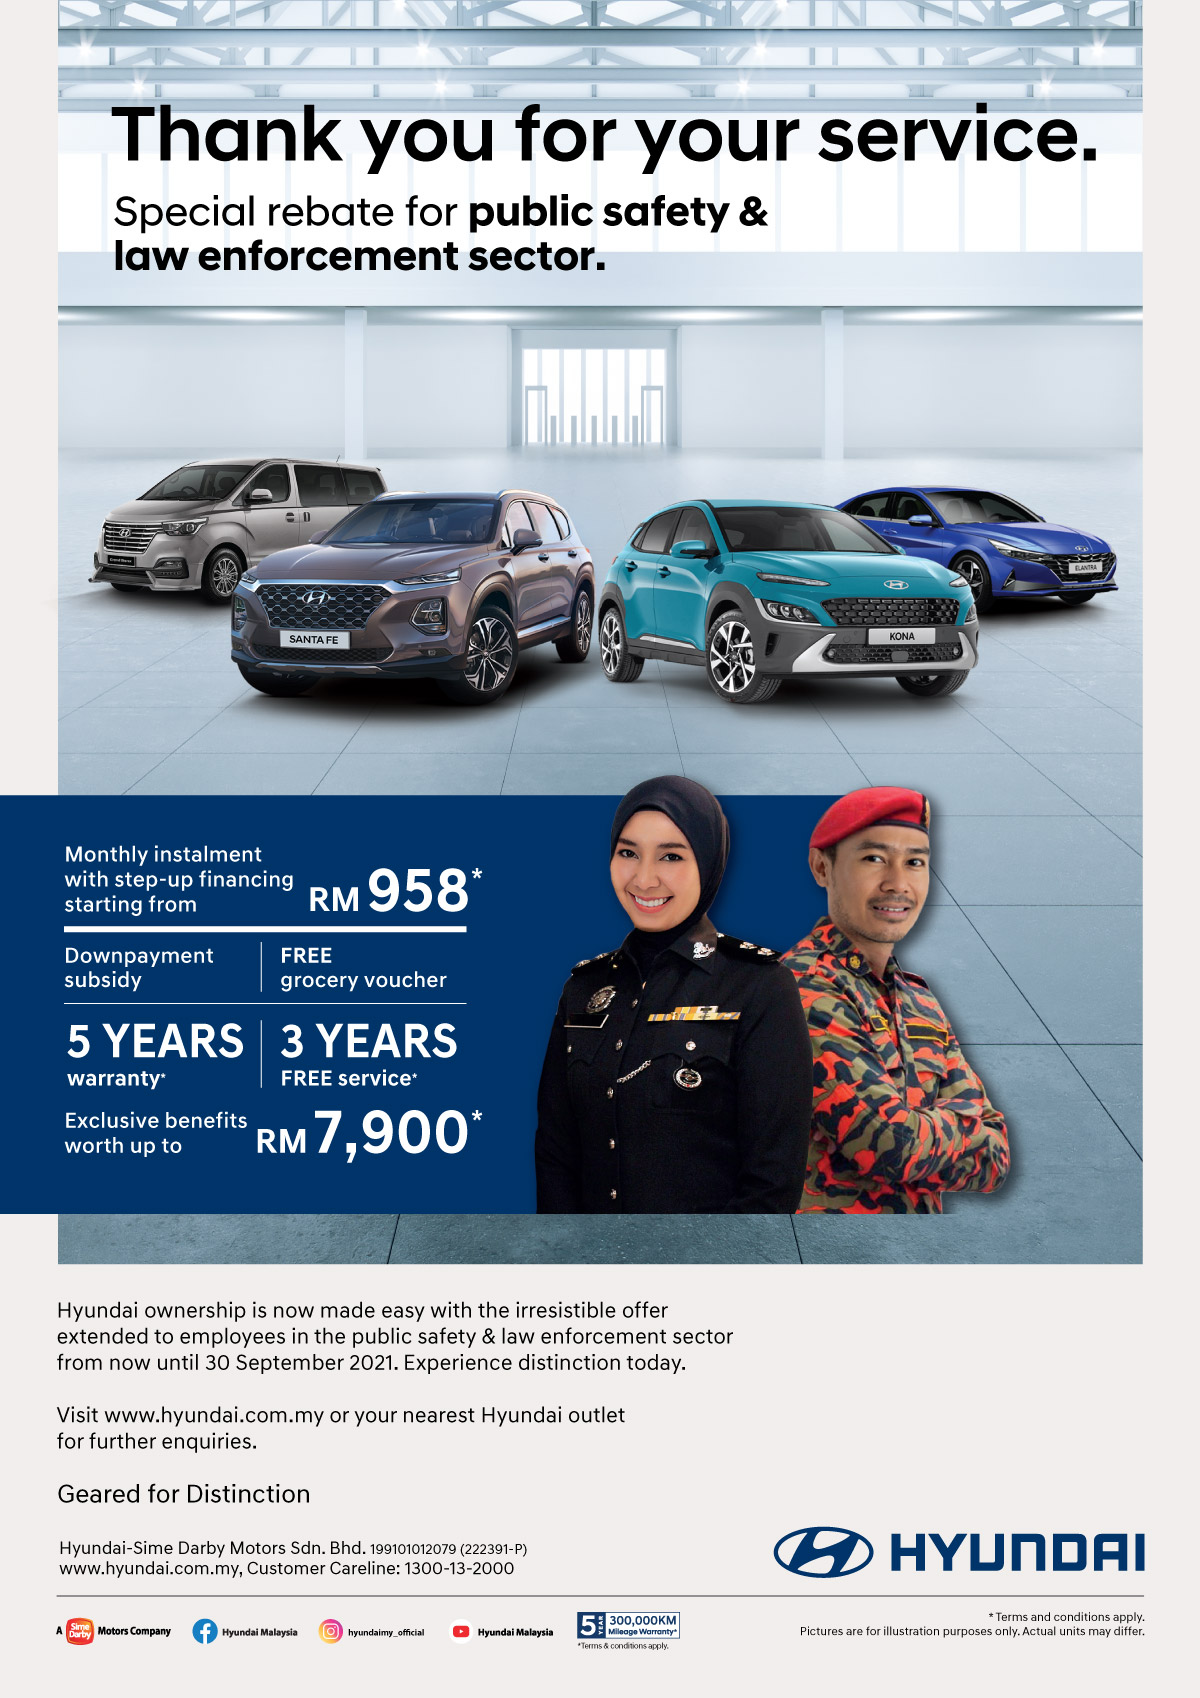 Thank you for your service. Special Rebate for Public Safety & Law Enforcement Sector. Monthly instalment with step-up financing starting from RM958* | Downpayment subsidy 5 years warranty* | Free Grocery voucher 3 years free services* | Hyundai ownership is now made easy with the irresistible offer extended to employees in the government healthcare sector from now until 30 September 2021. Experience distinction today. Visit www.hyundai.com.my or your nearest Hyundai outlet for further enquiries. Exclusive benefits worth up to RM7,900* Terms and Conditions apply.